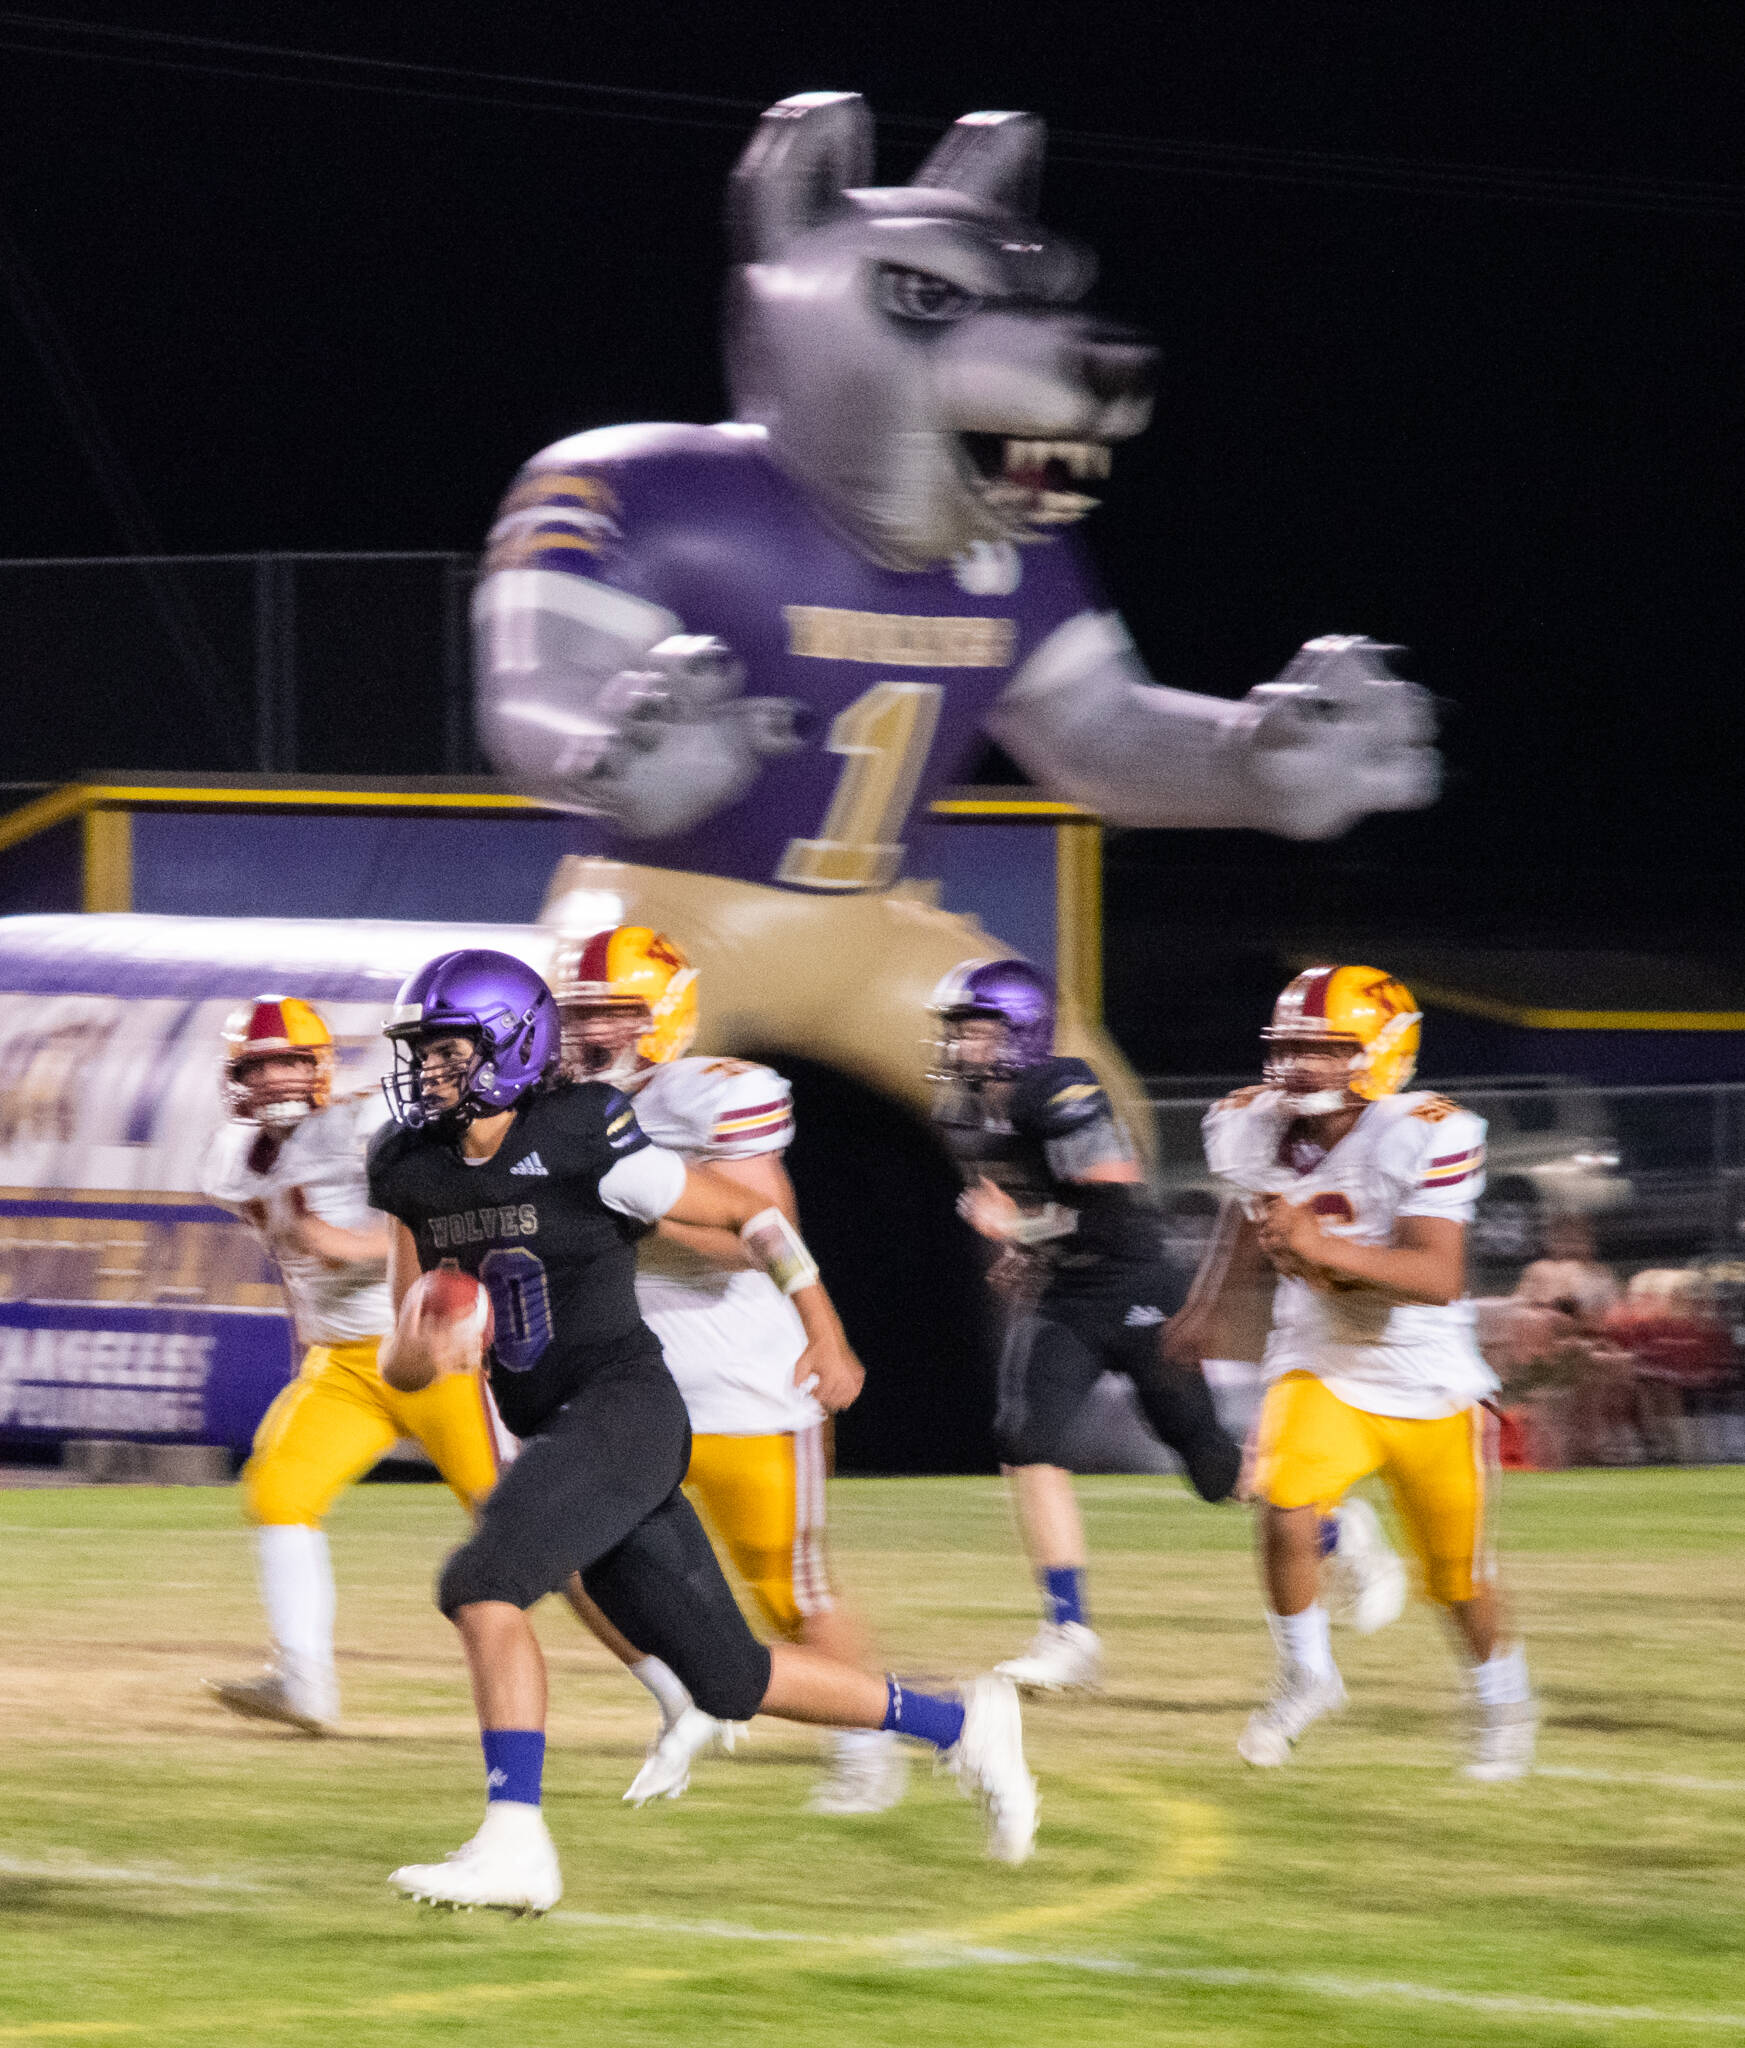 Sequim Gazette photo by Emily Matthiessen
Sequim’s Lars Wiker races to a big gain in the Wolves’ 27-13 Homecoming victory on Sept. 30.